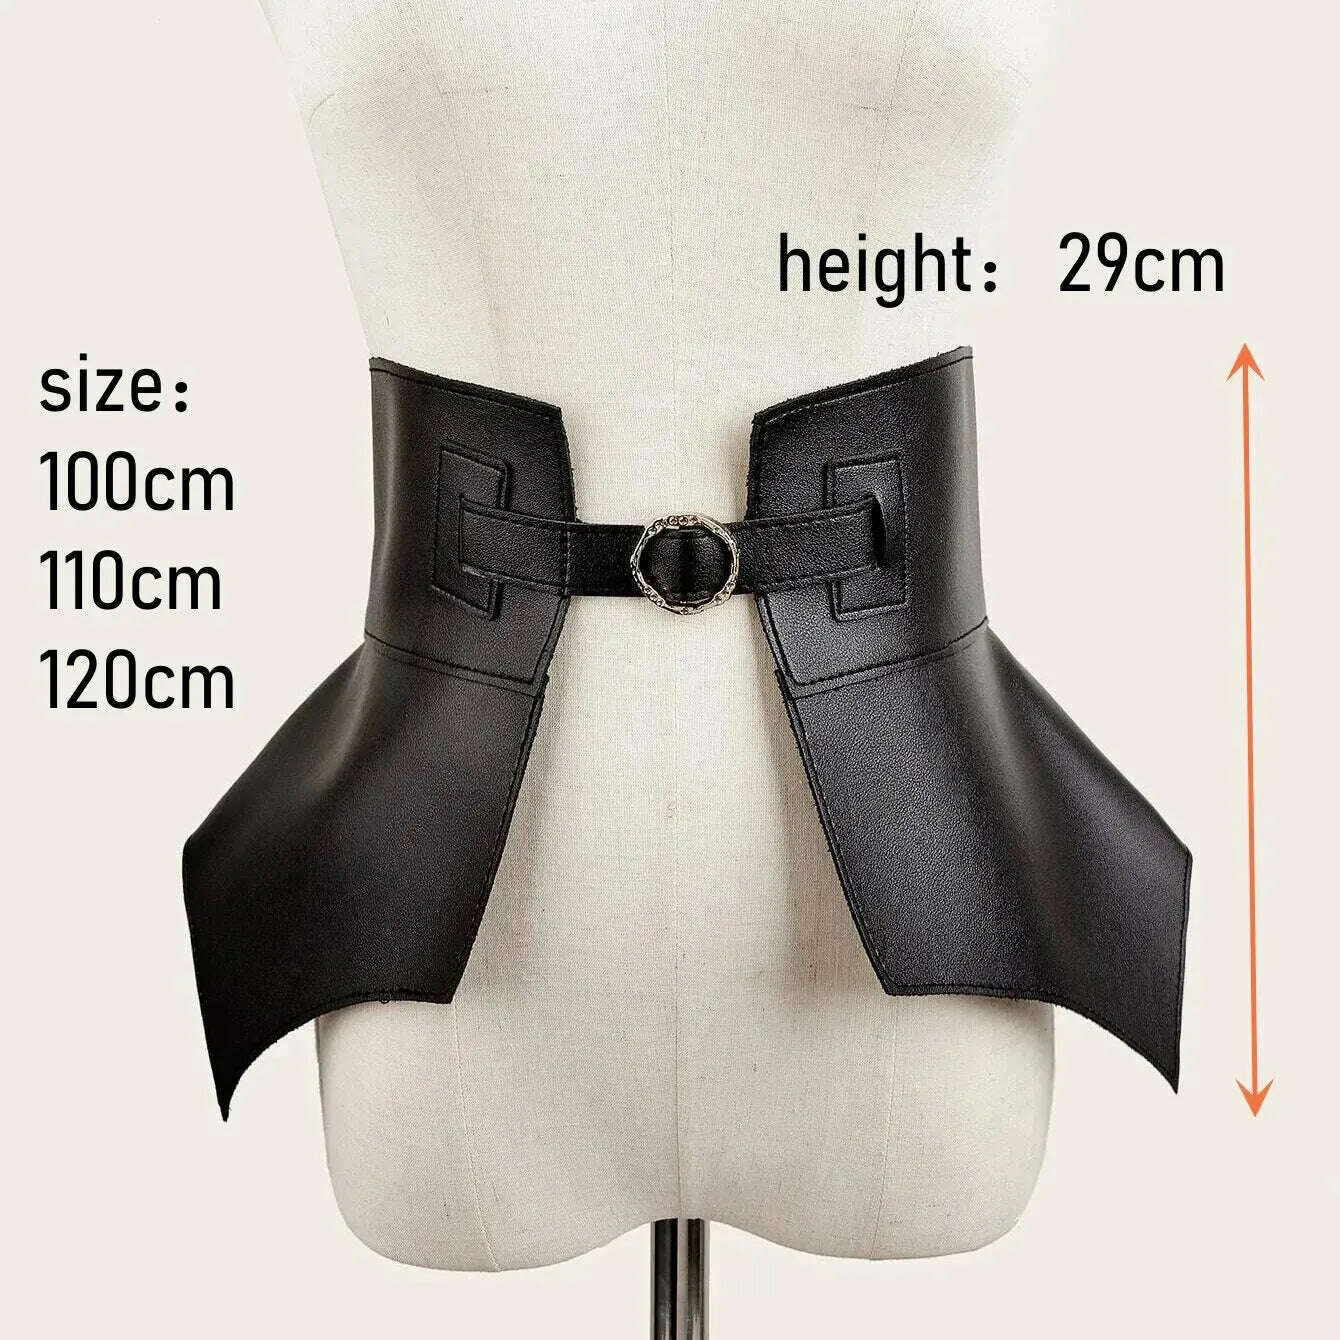 KIMLUD, Classic Black Court Style PU Leather Long and Wide Belt Punk Style Women's Fashion Autumn and Winter PU Belts Corsets for Women, KIMLUD Women's Clothes